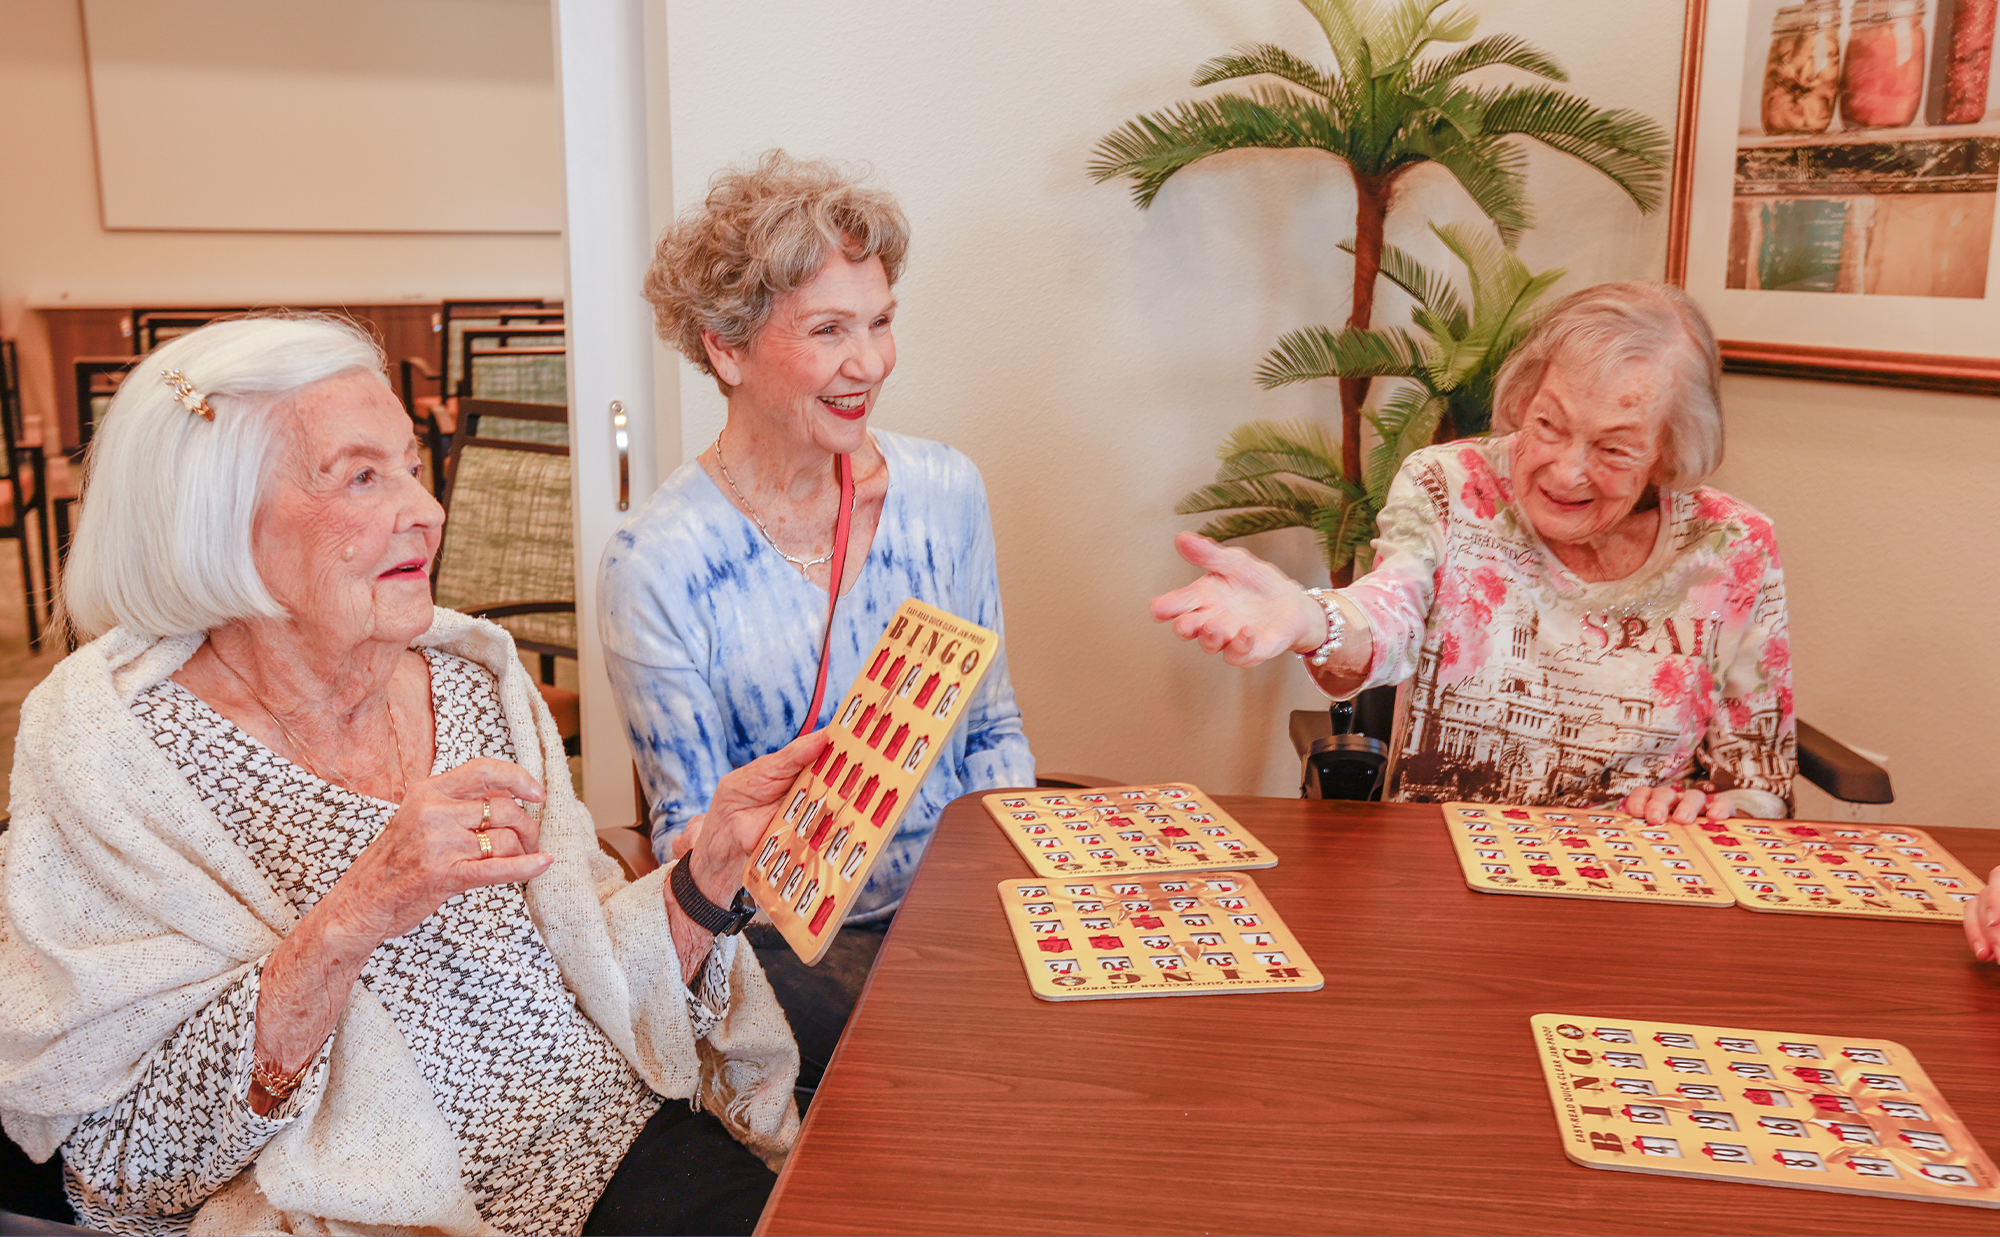 A group of women sitting at a table playing a game.